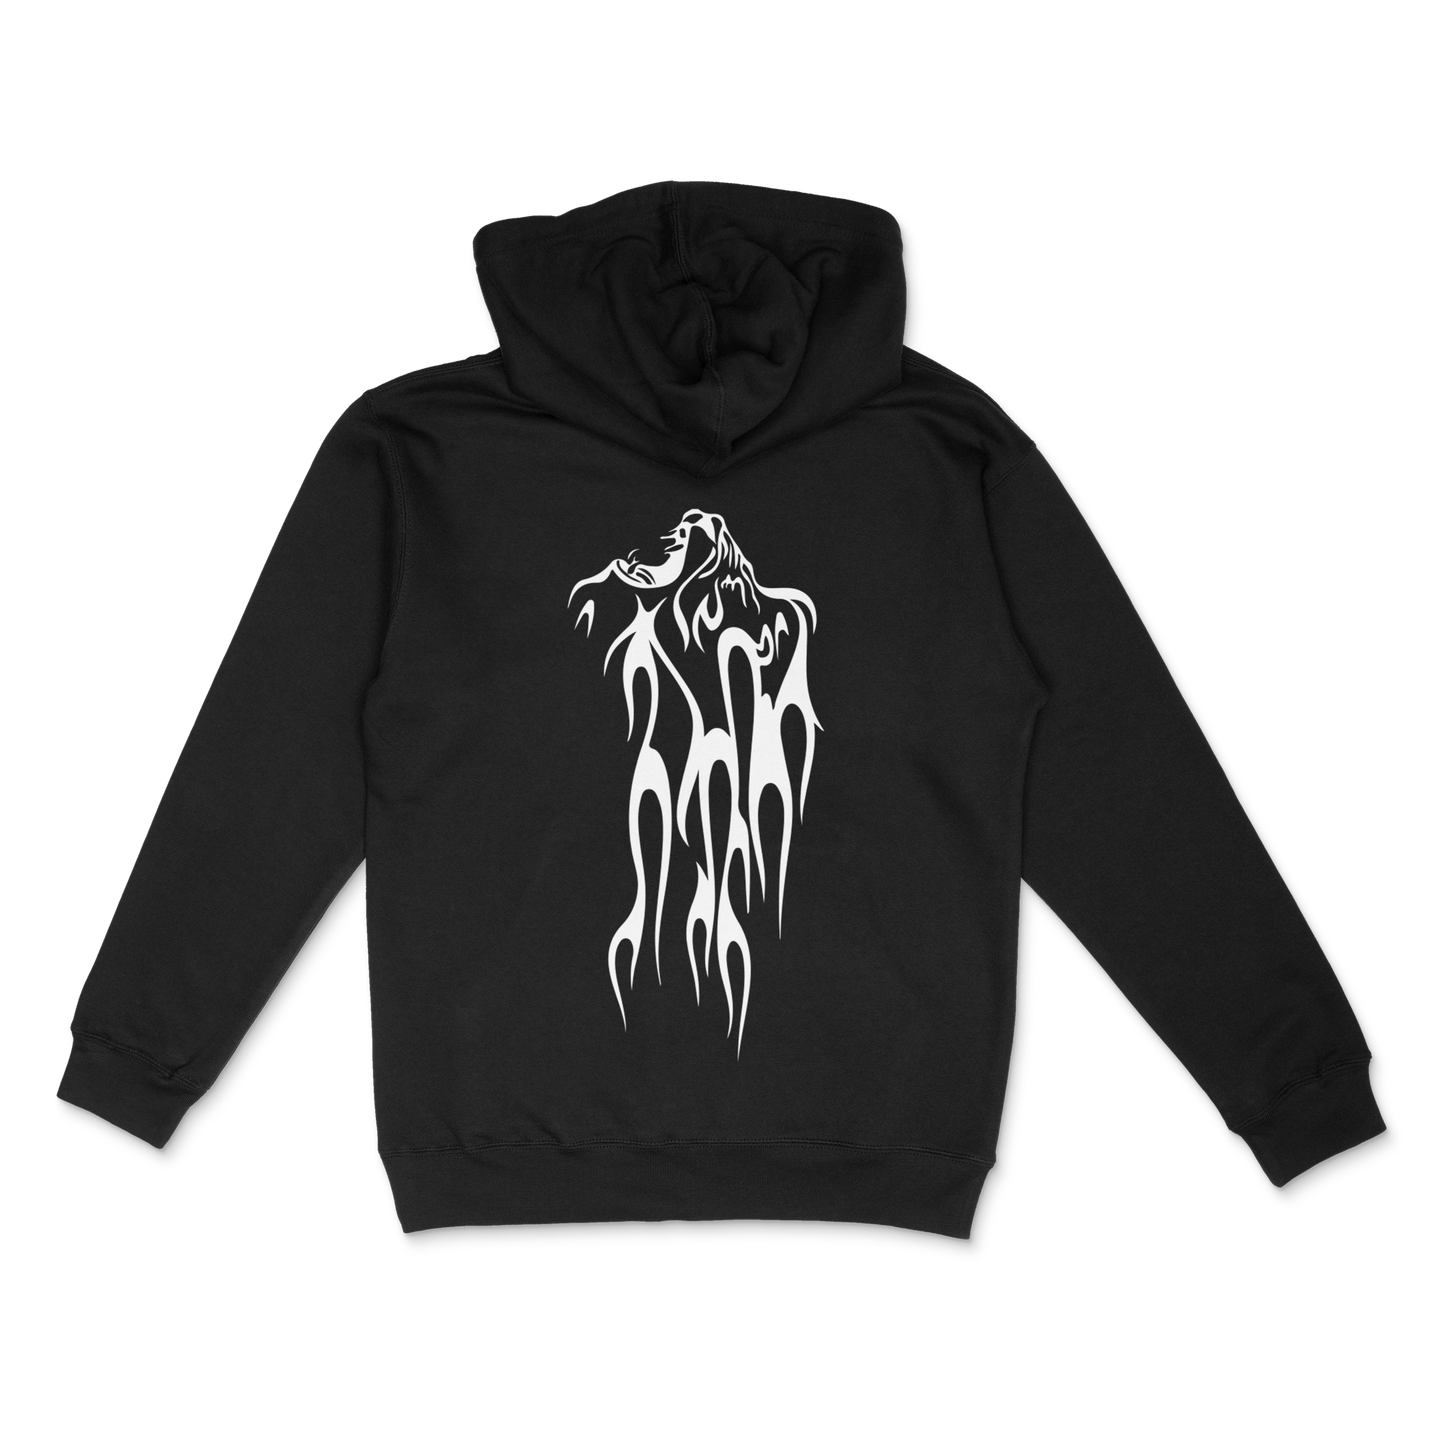 King of The Jungle Hoodie - Invincible - Flaming Lion - Black